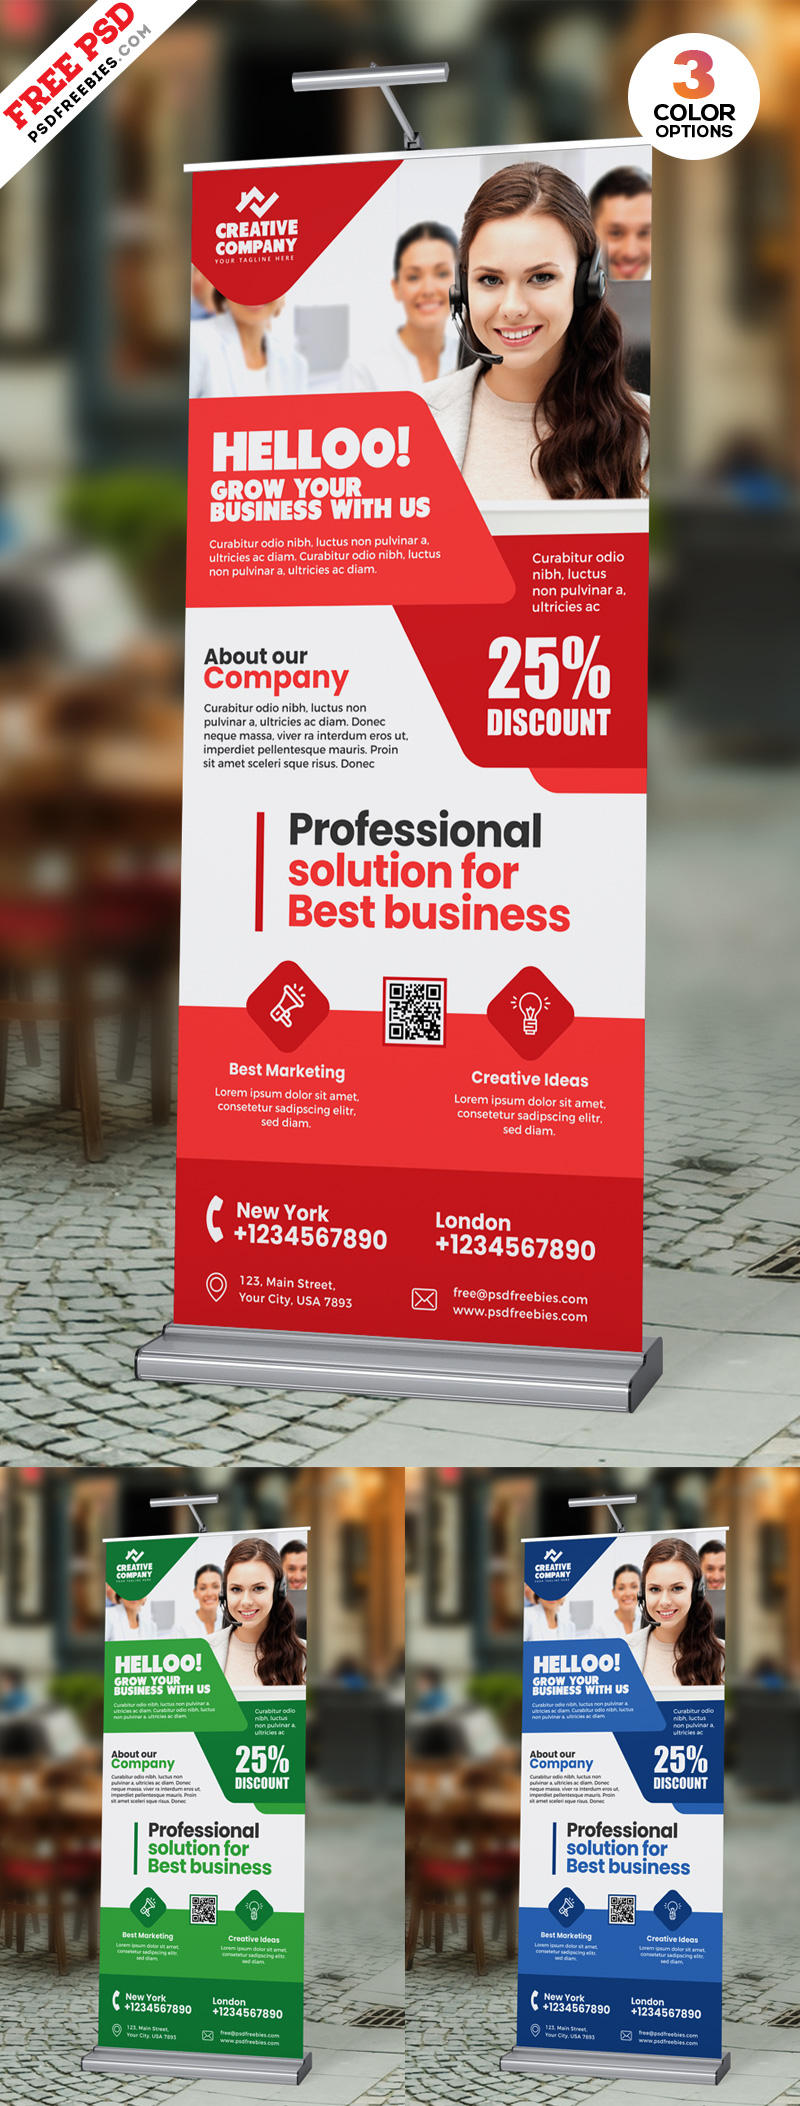 Roll-Up Banner Design PSD Free Download